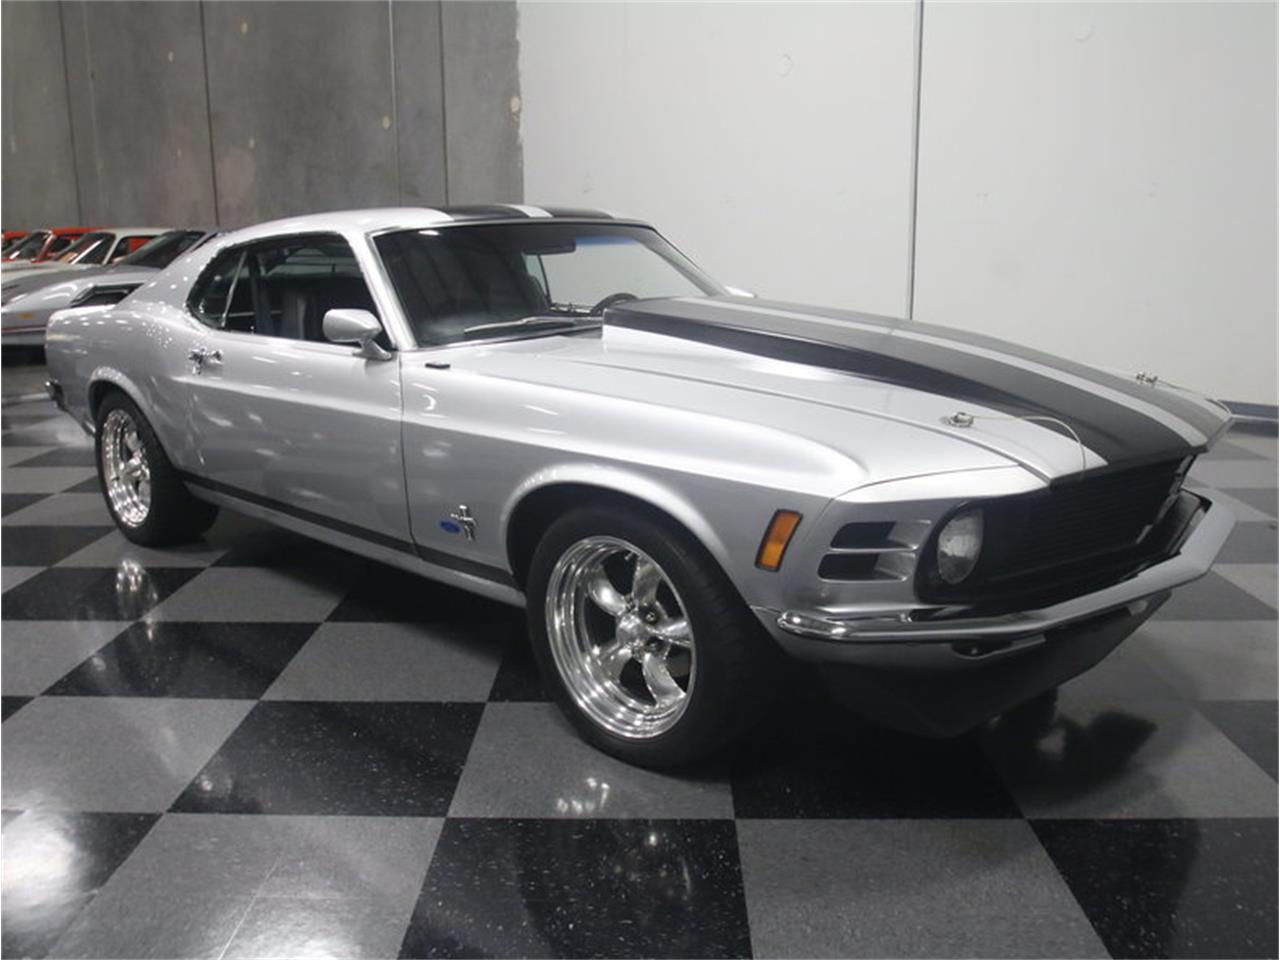 1970 Ford Mustang Fastback Restomod for Sale | ClassicCars.com | CC-988205